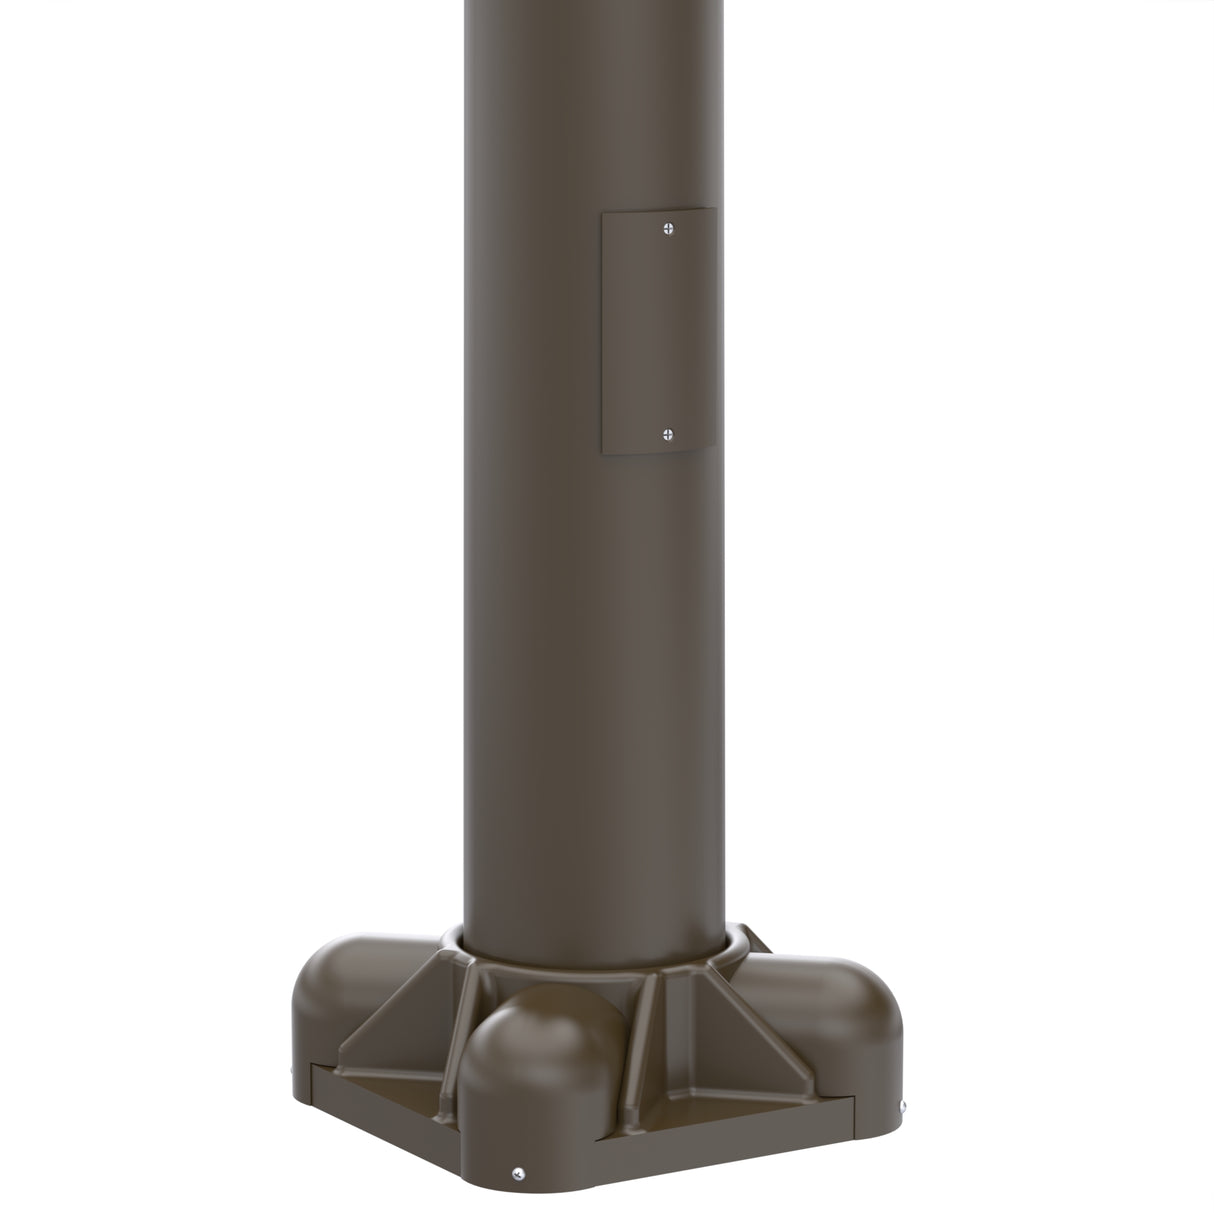 39' Tall x 8.0" Base OD x 4.5" Top OD x 0.250" Thick, Round Tapered Aluminum, Anchor Base Light Pole